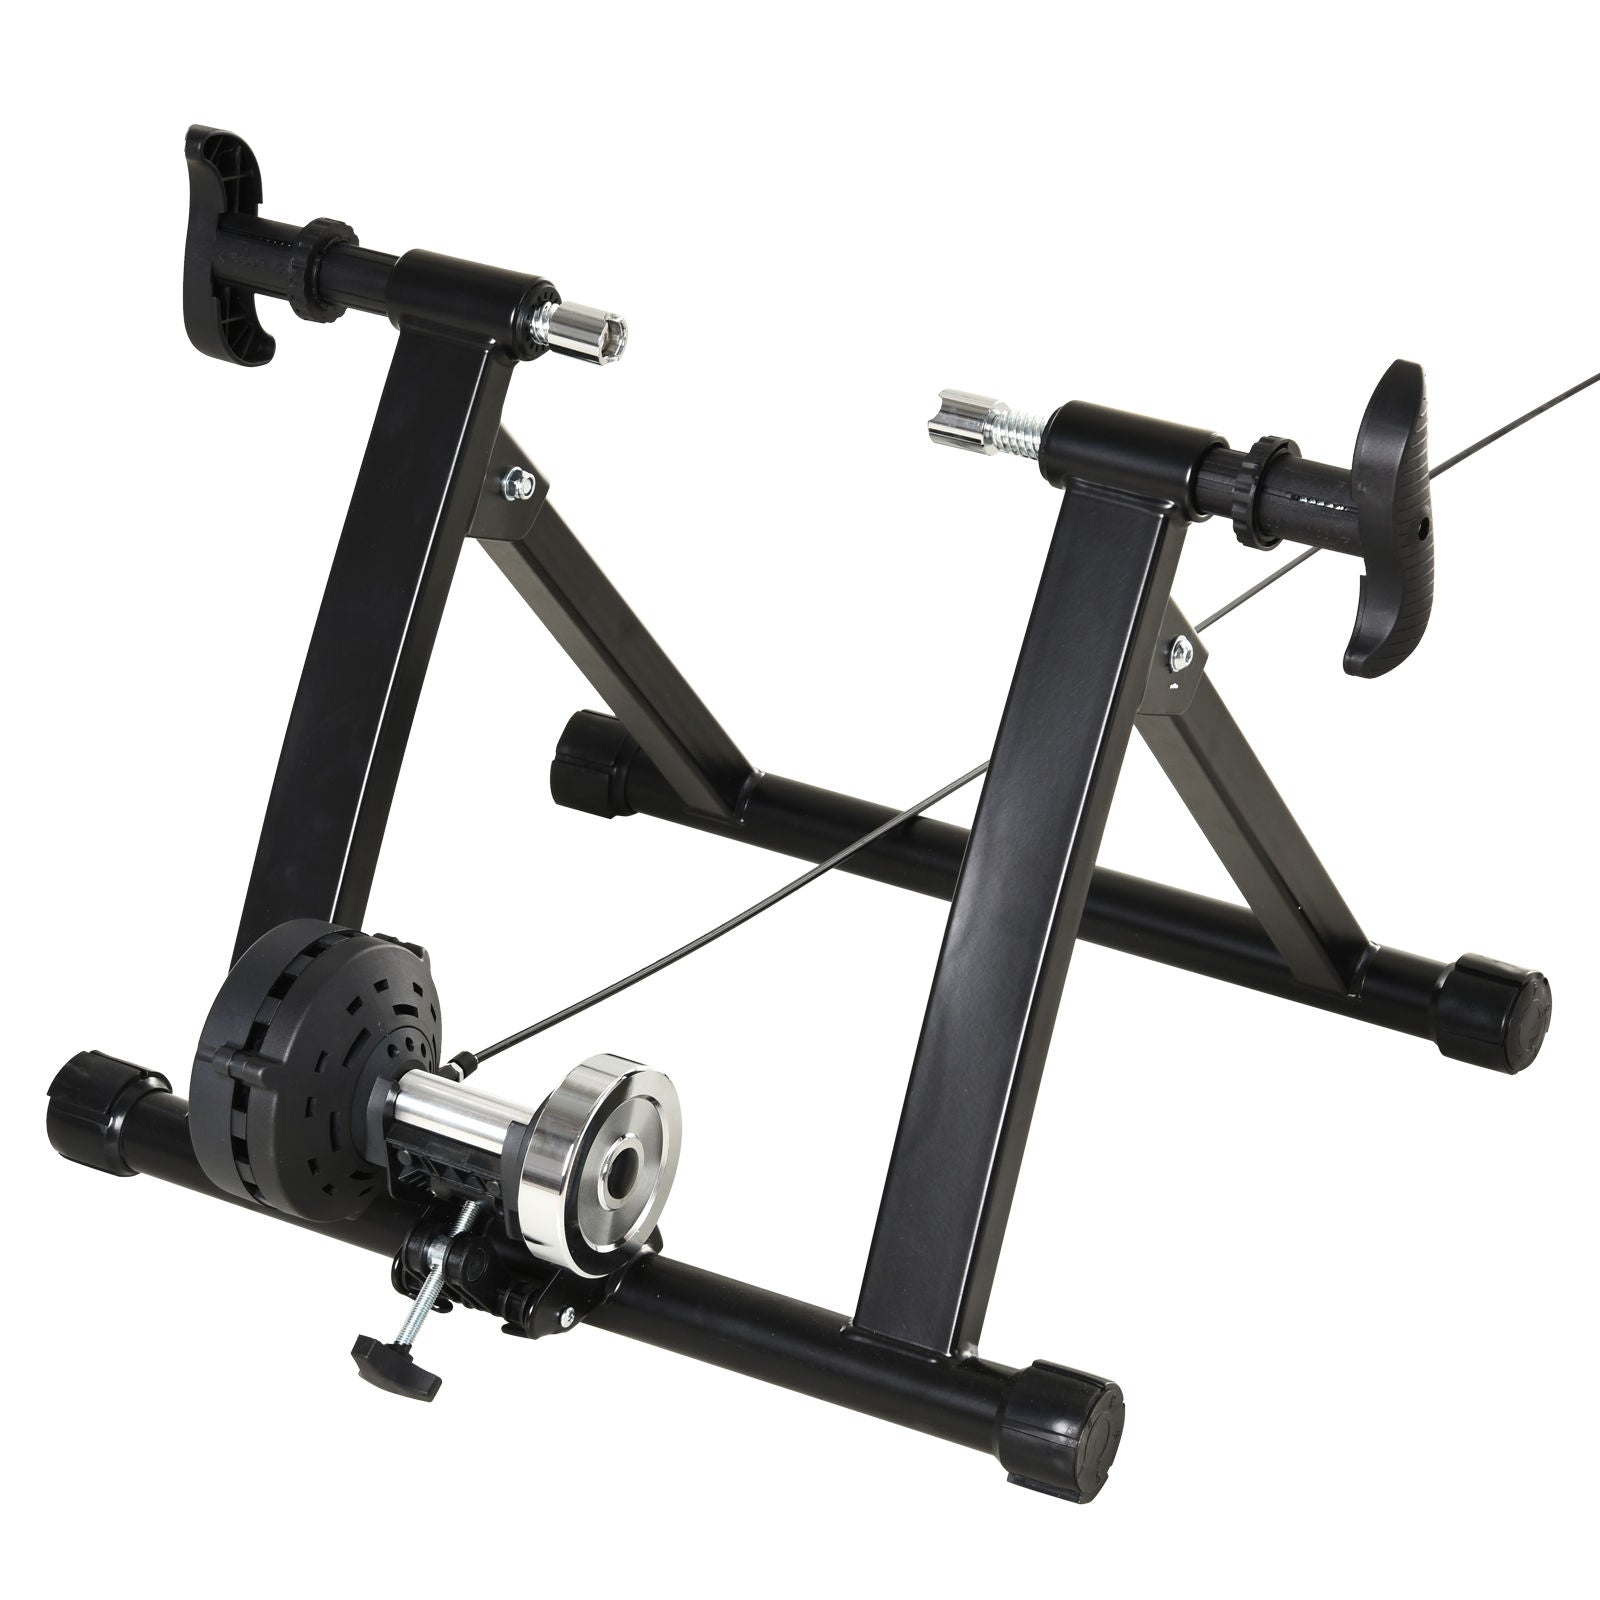 Nancy's Brooks Bicycle Trainer - Roller trainer, 8 resistance levels, foldable, for 26-29''